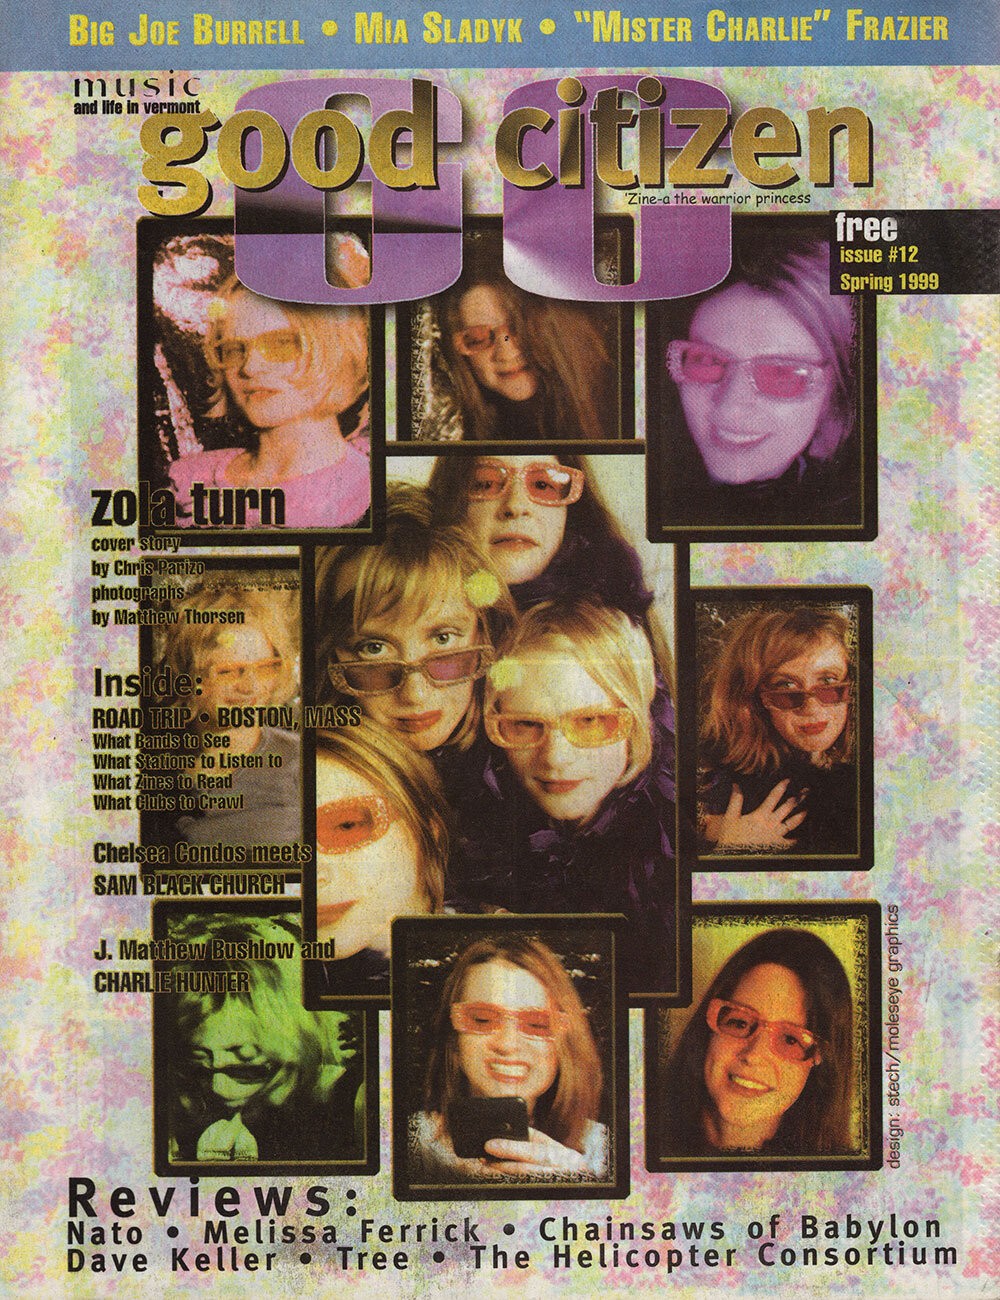 GC Issue 12, Spring 1999